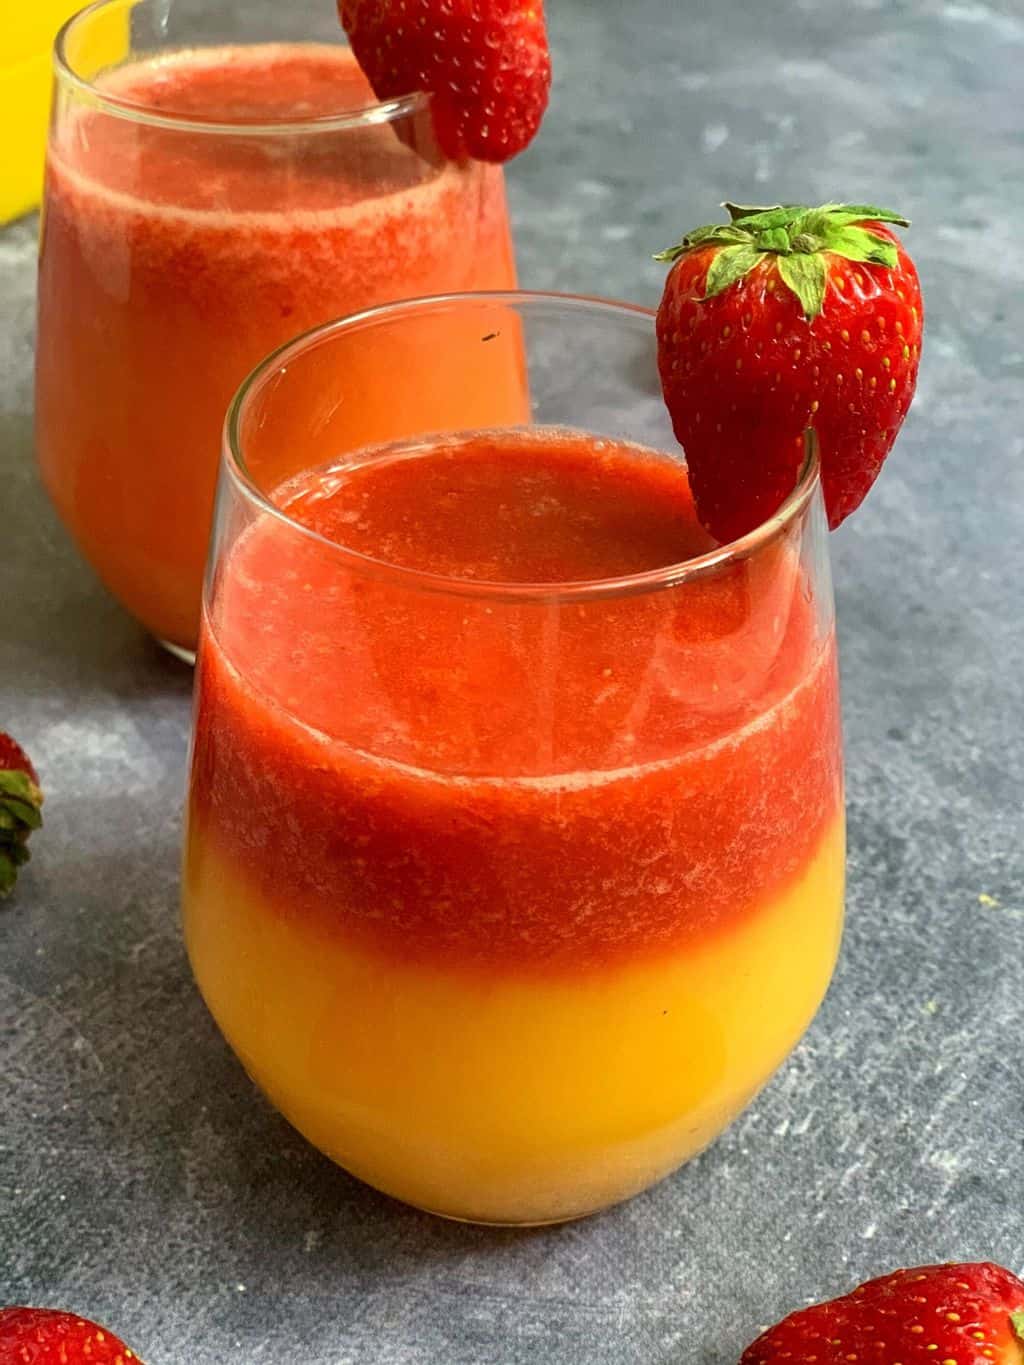 Strawberry and Orange juice served in a glass with fresh strawberry for garnish